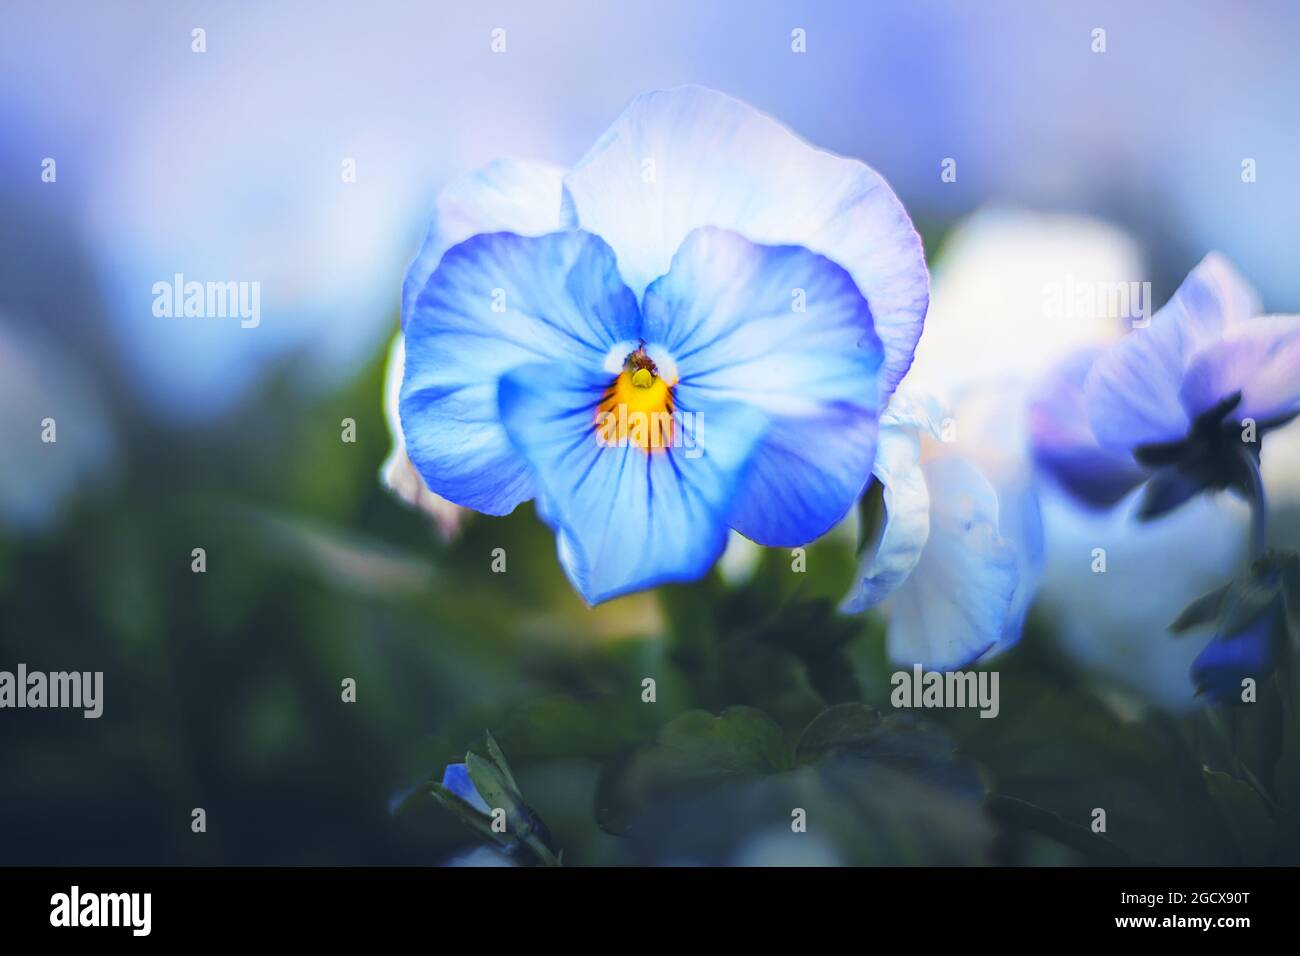 Beautiful fragrant flowers of blue pansies with delicate petals bloom on a flower bed among dark leaves on a clear summer day. Nature in spring. Stock Photo